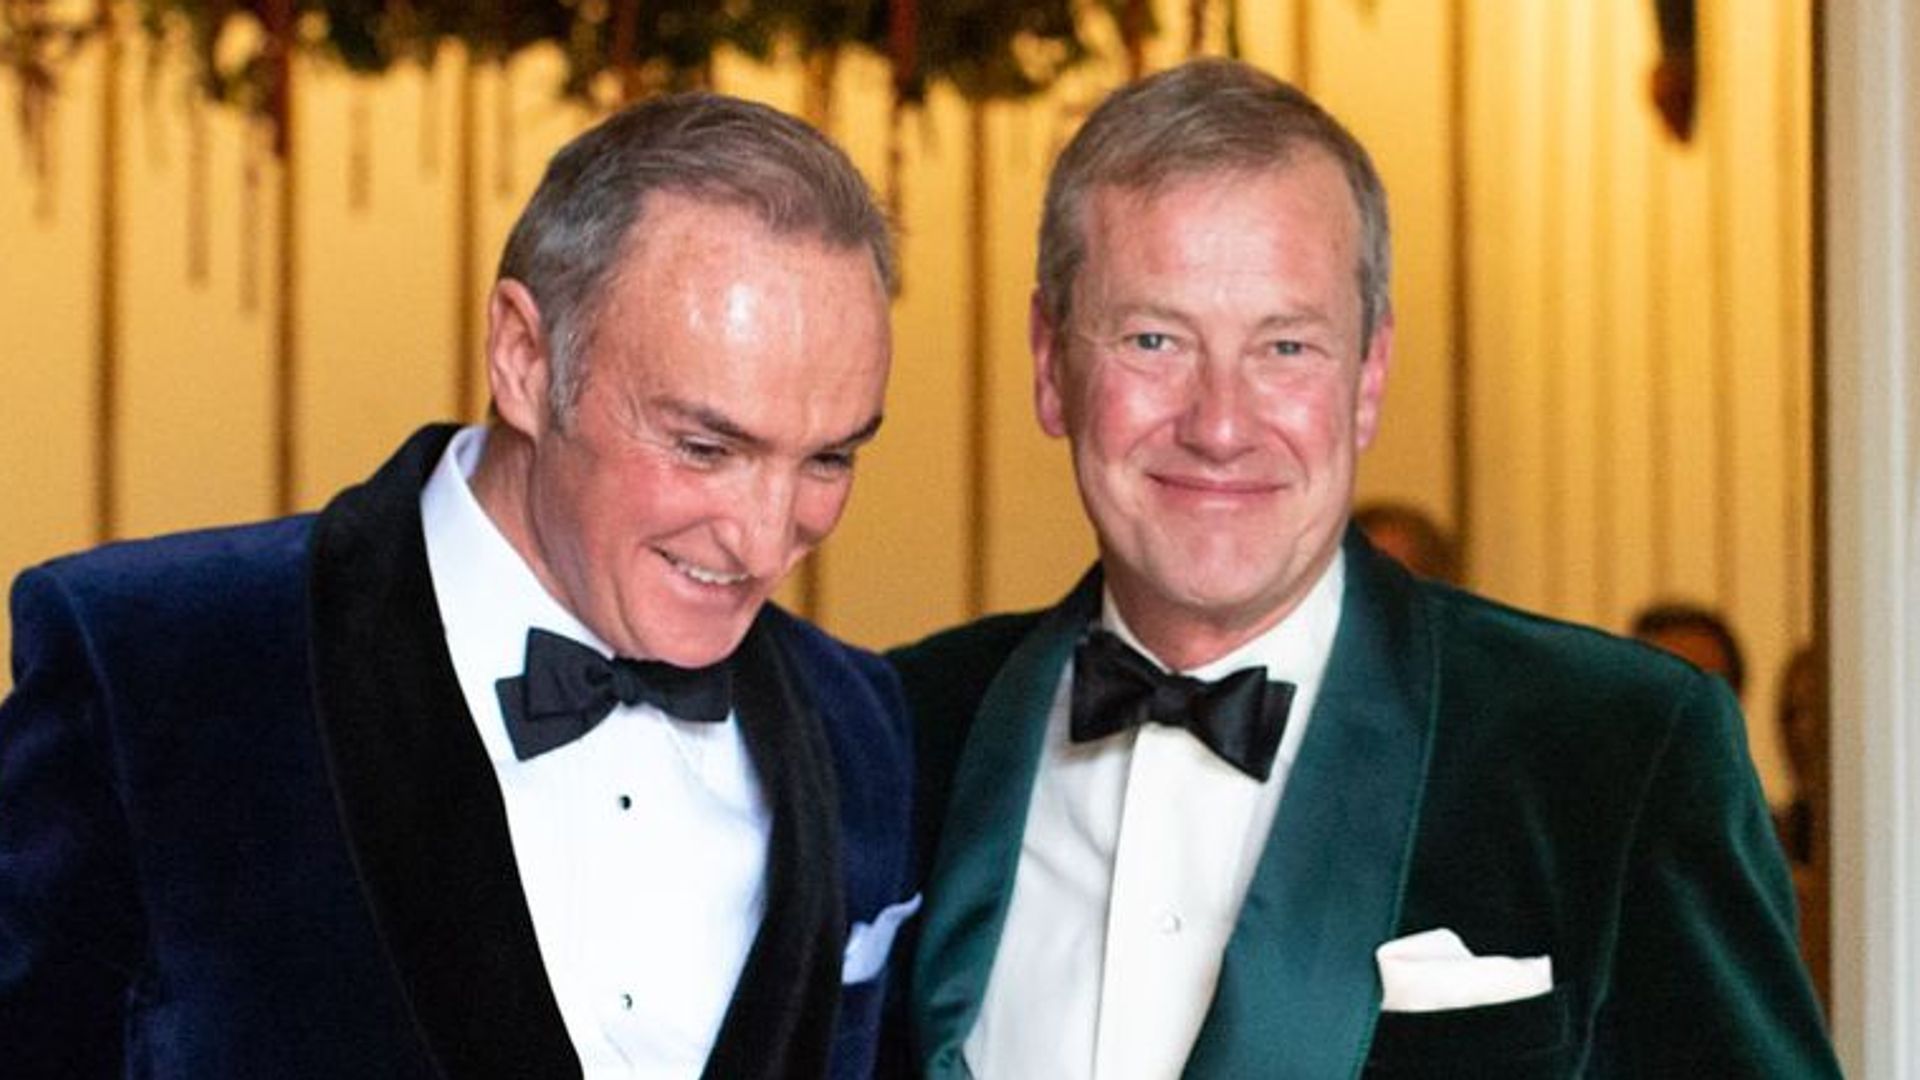 Meet Lord Ivar Mountbatten - the late Queen's gay cousin who made royal history